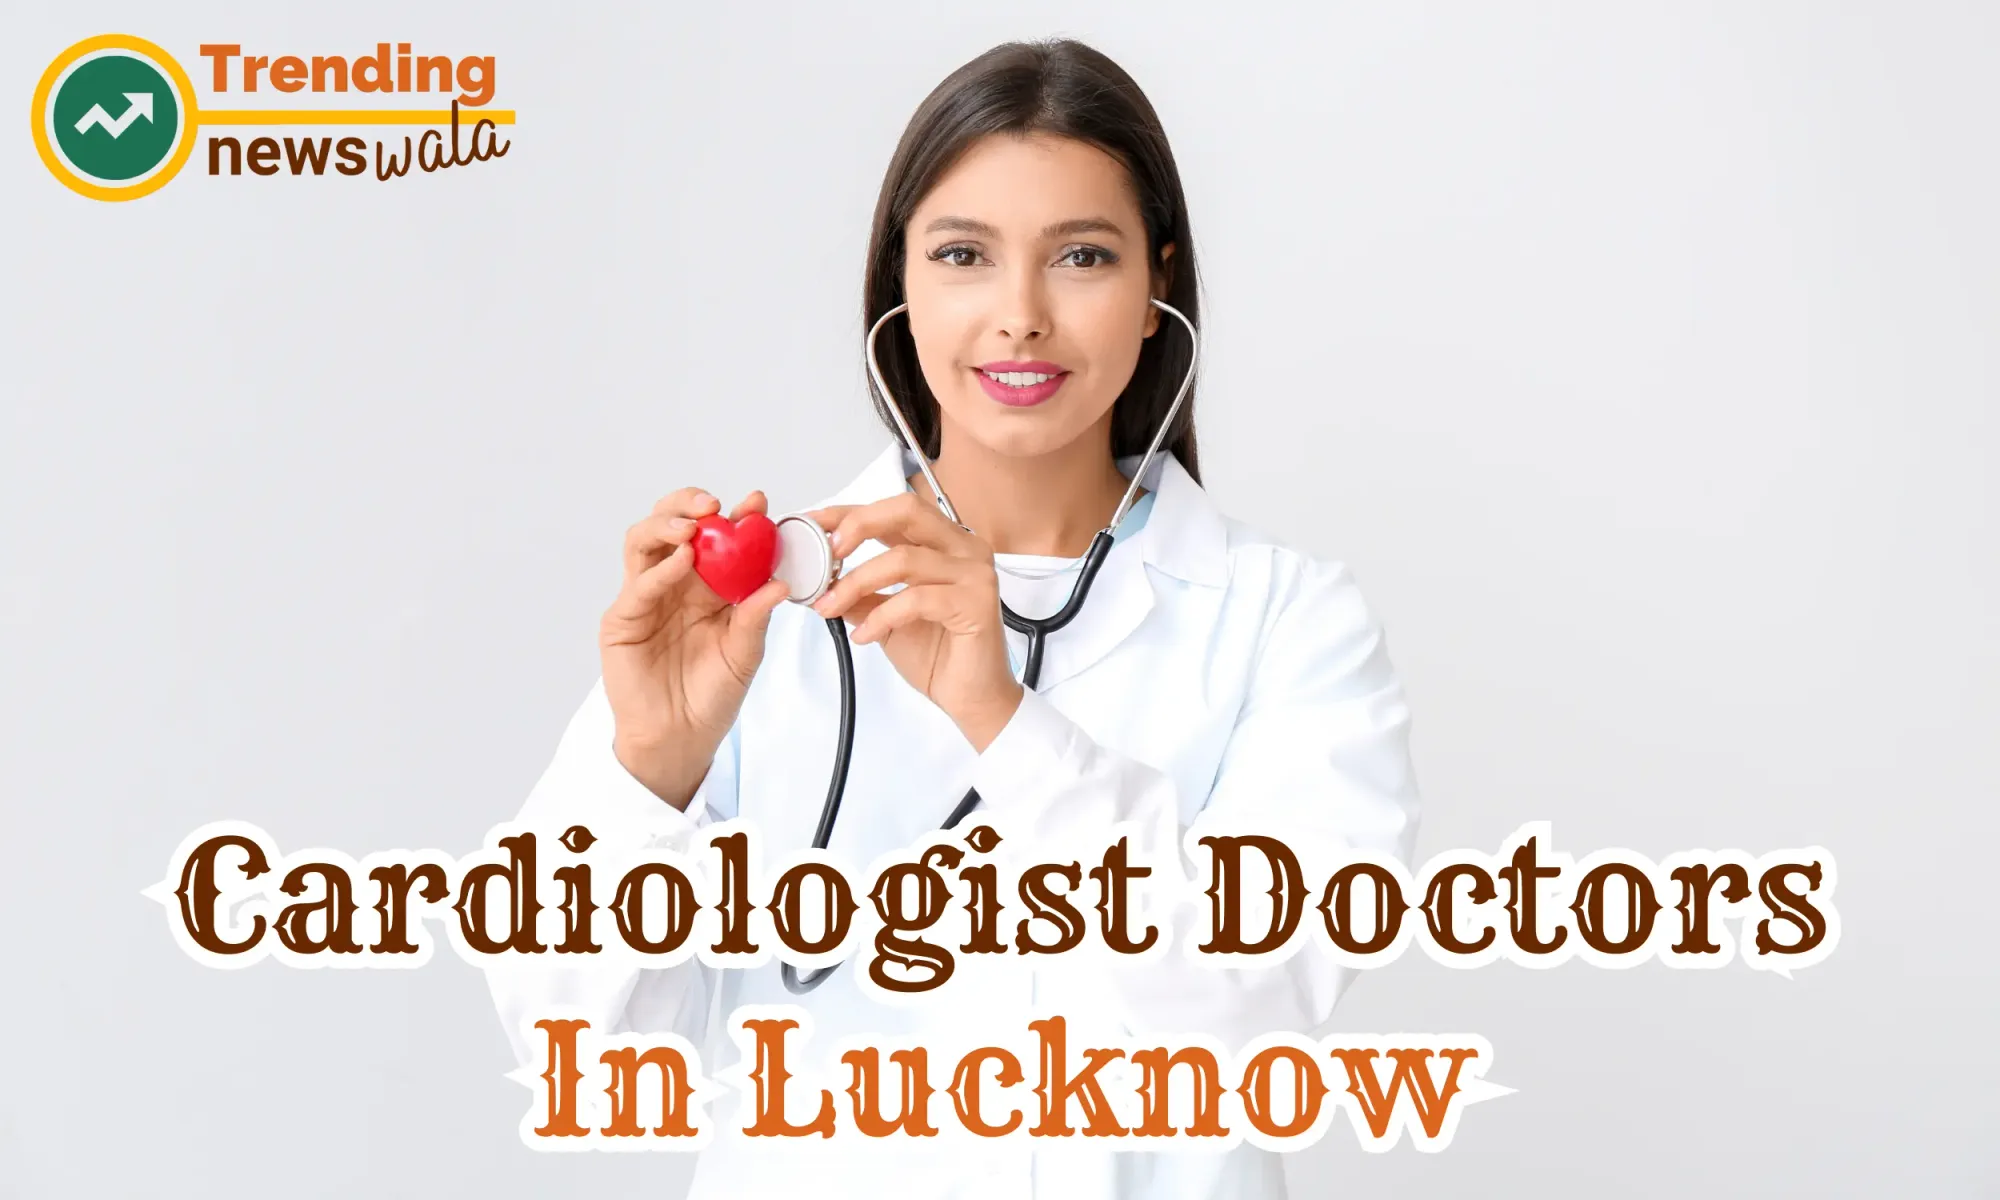 Top 10 Cardiologist Hospitals in Lucknow